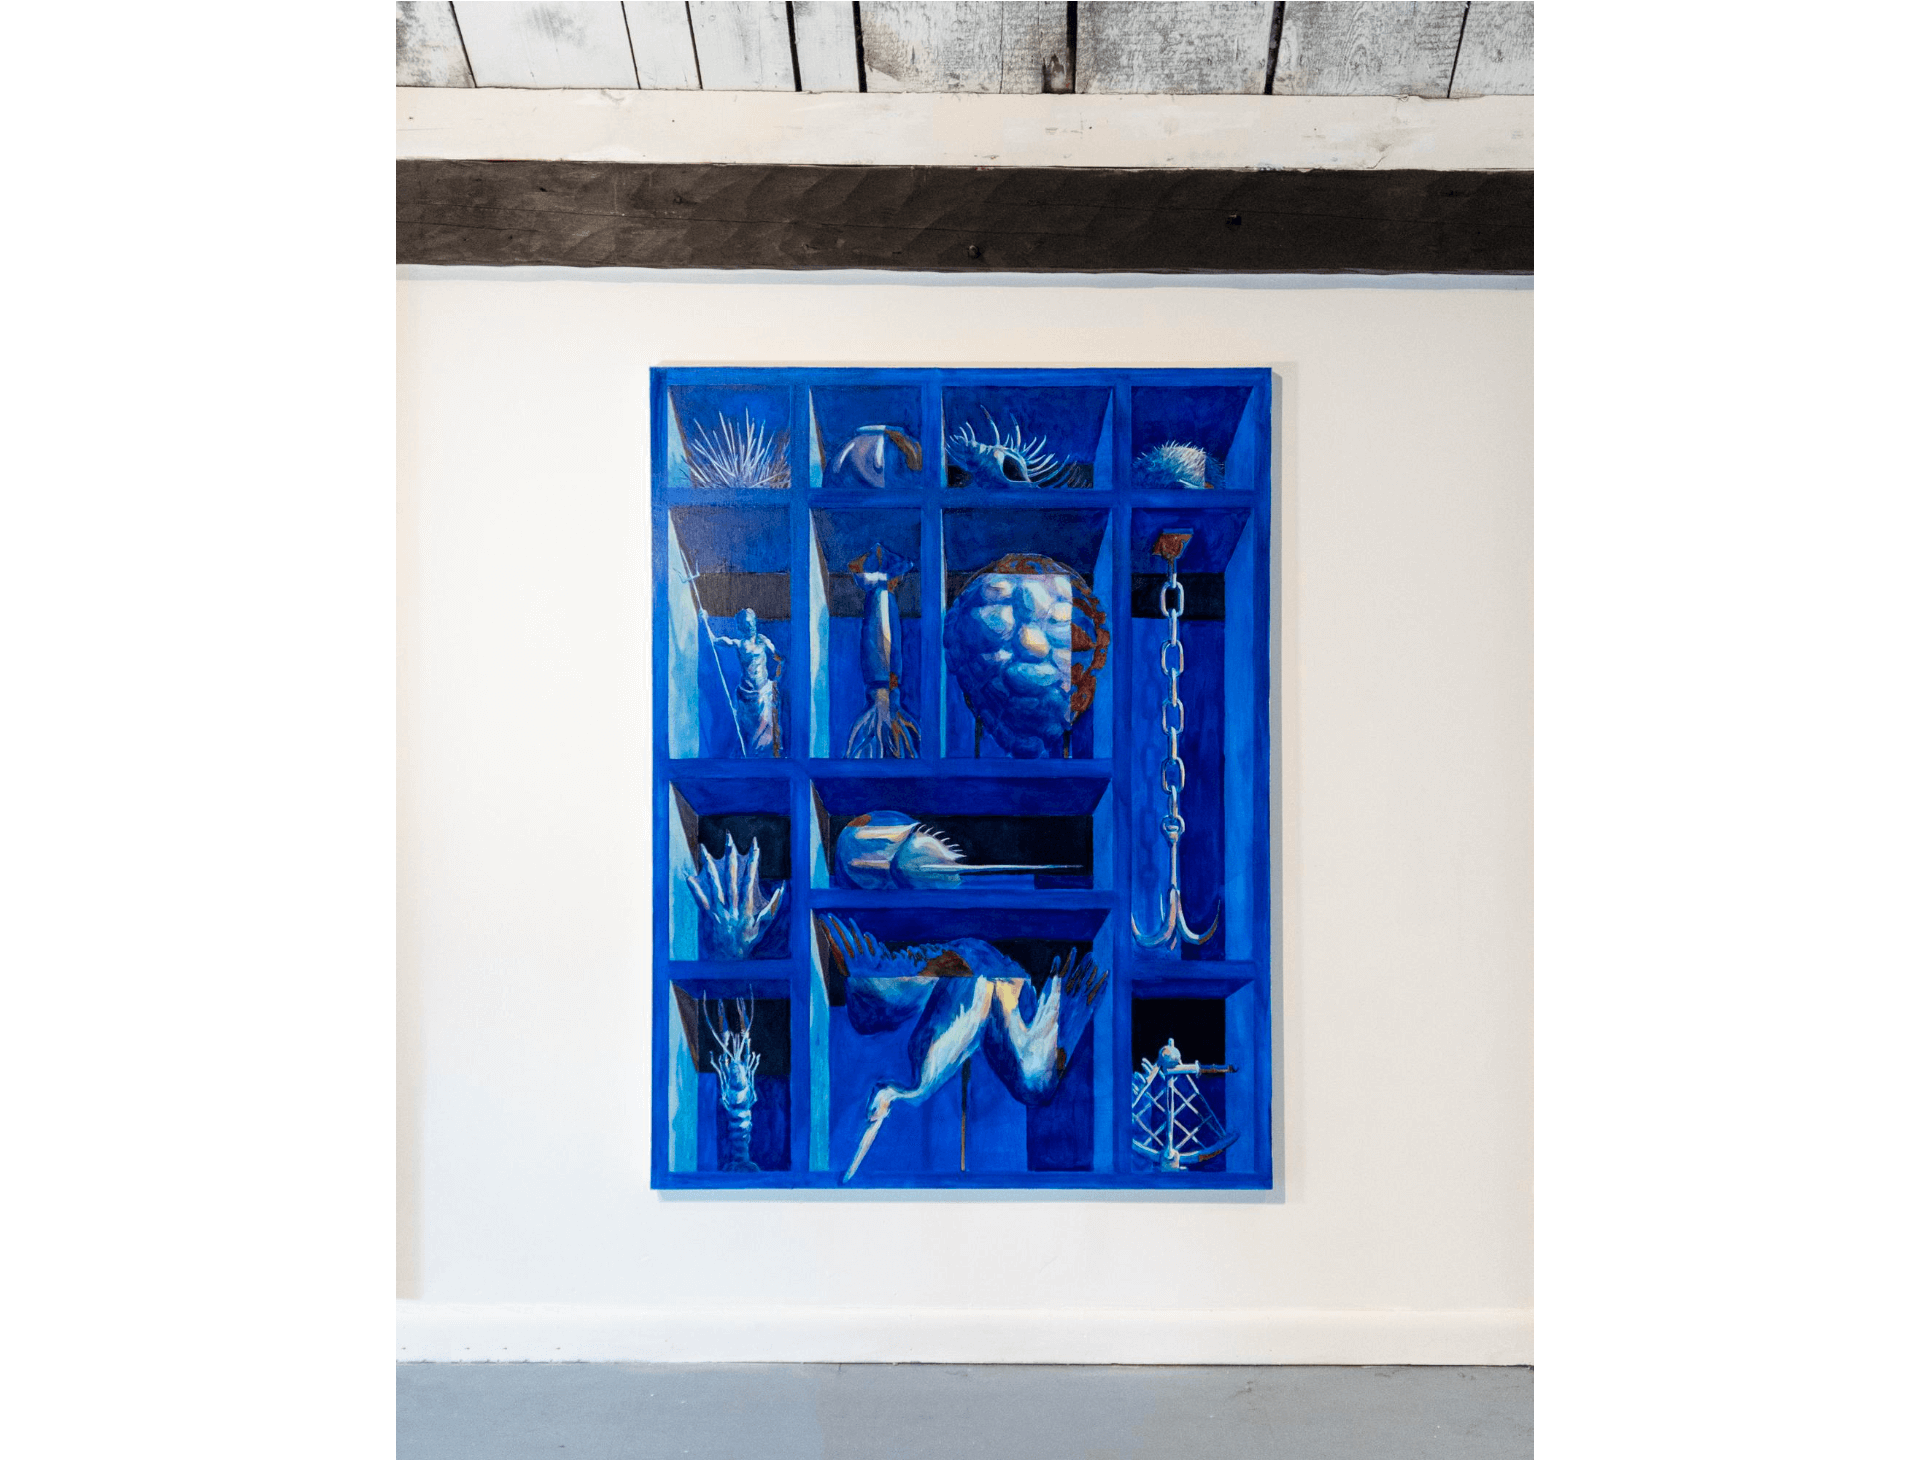 Image of "Blue Artifacts" at the Parsonage Gallery